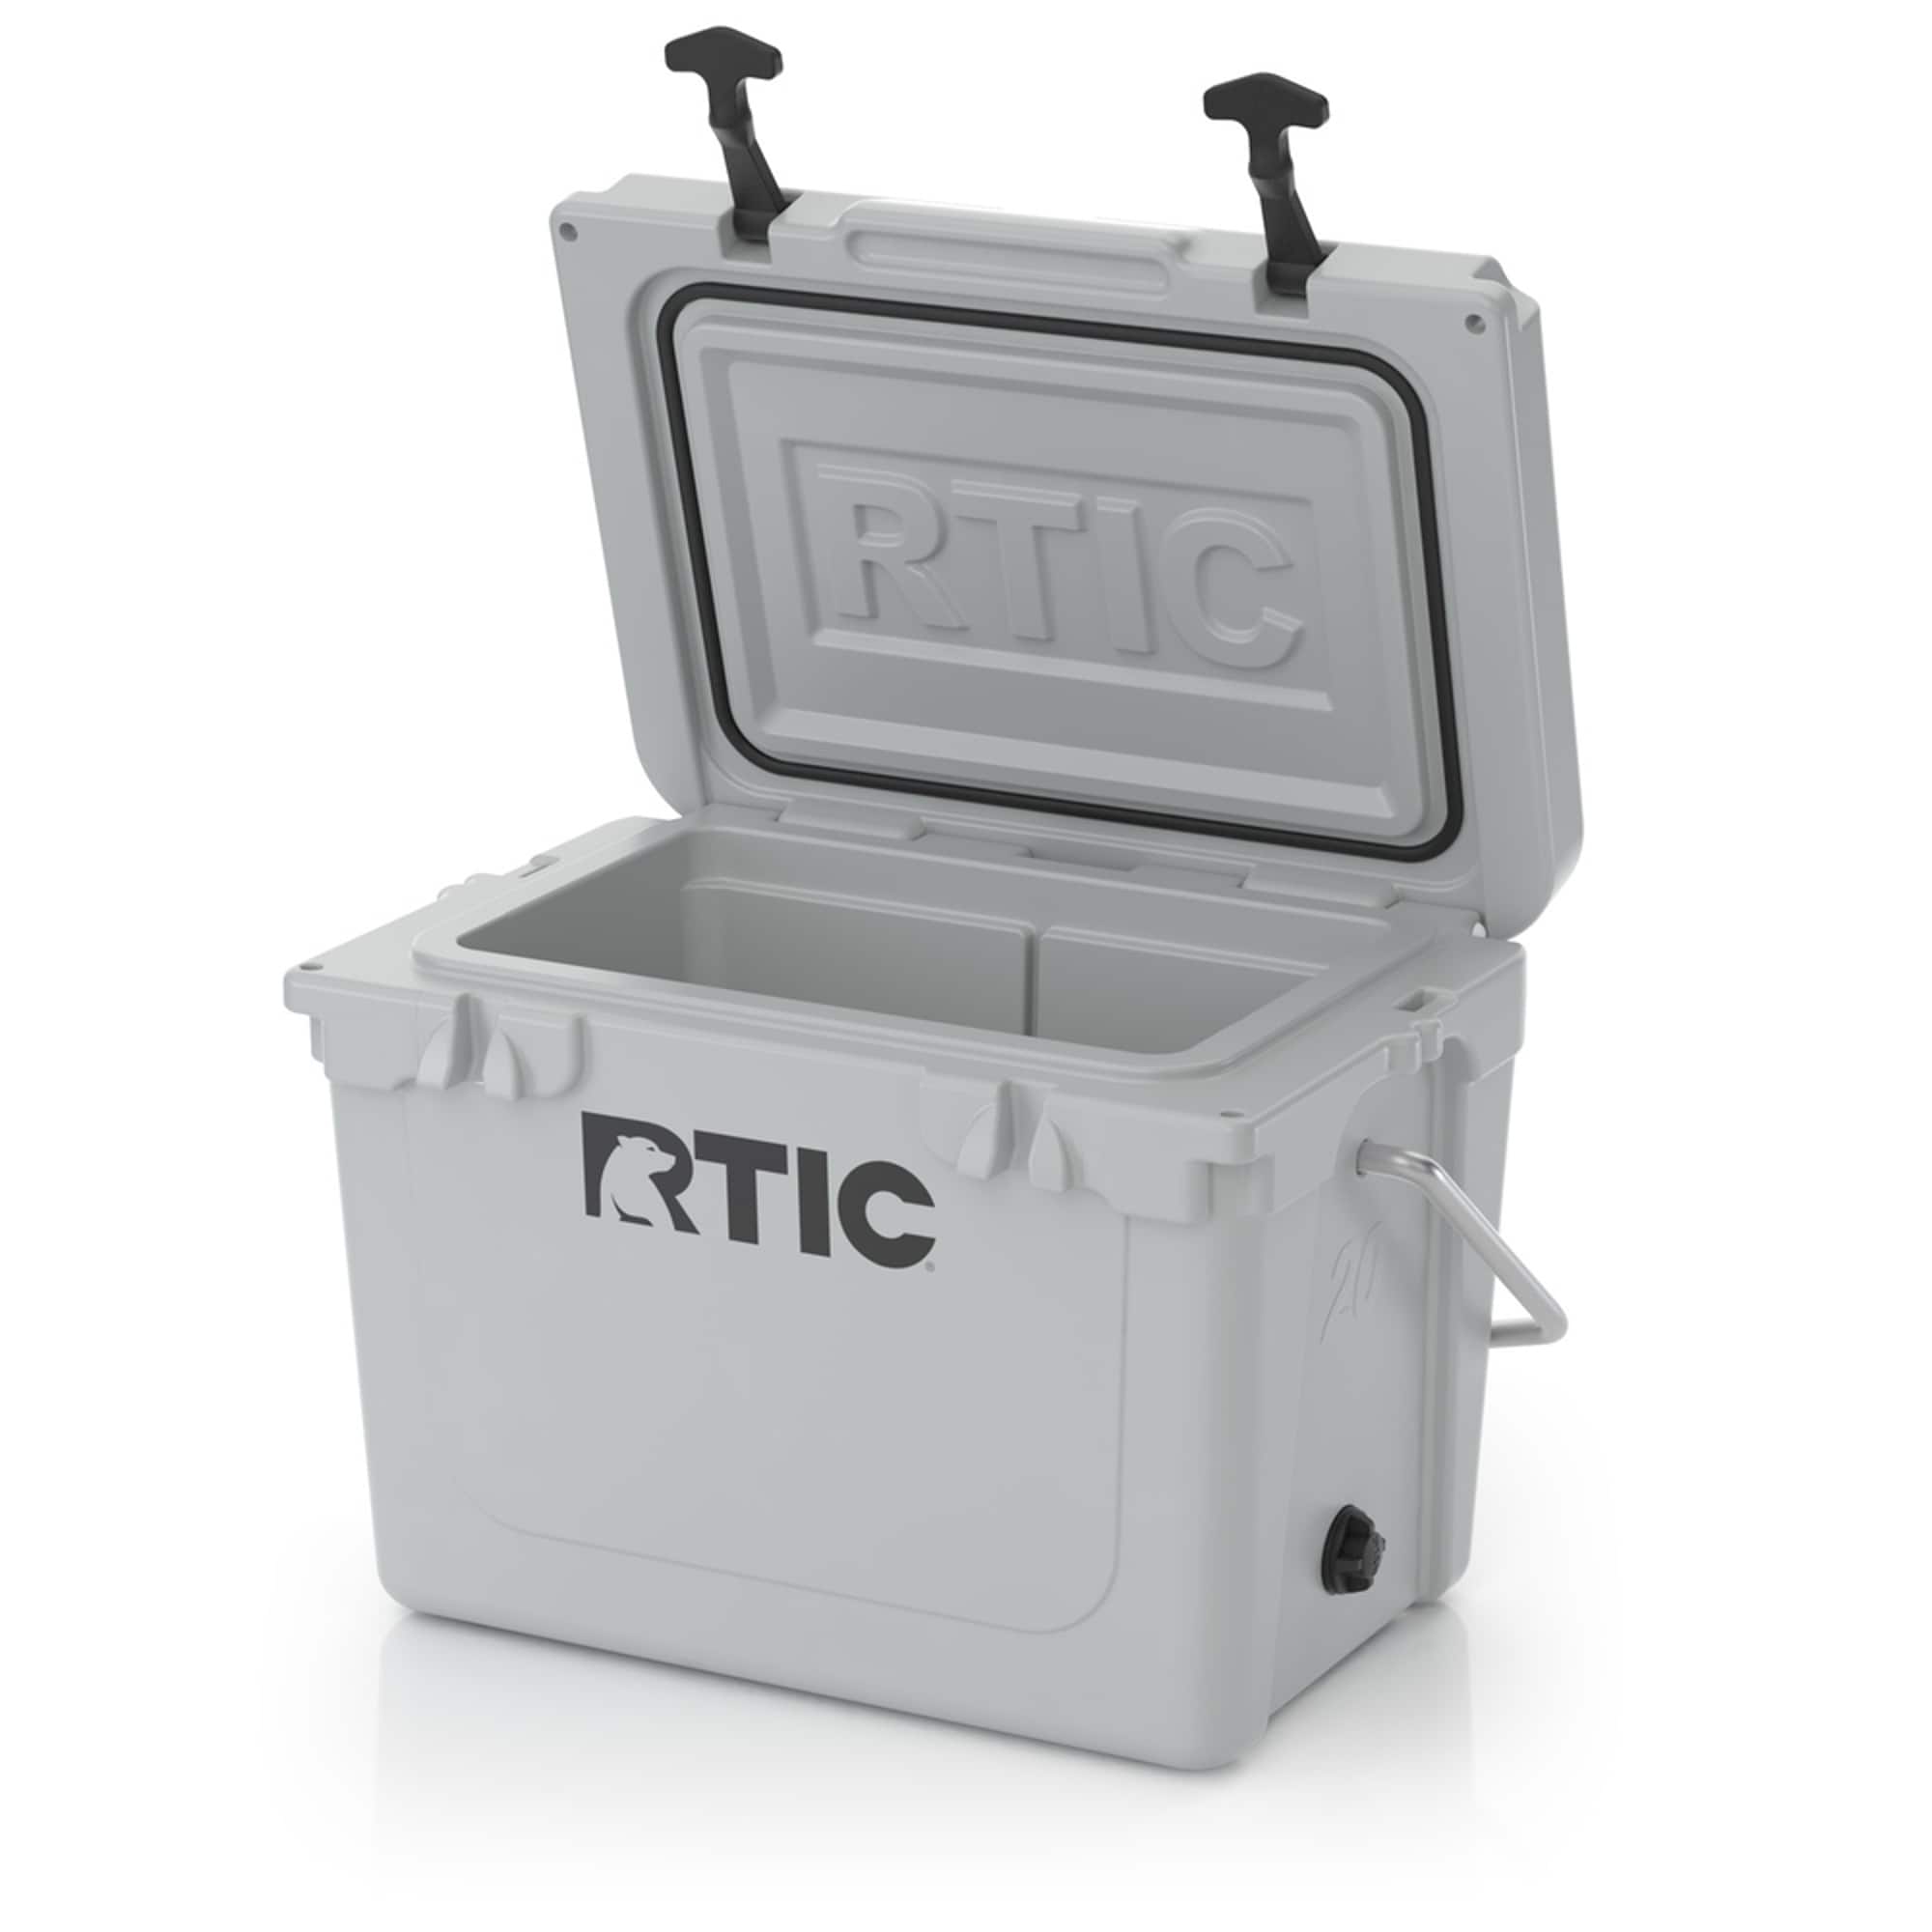 Rtic RTIC 45 Grey. Trying to Sell. (Please read description) : r/CampingGear